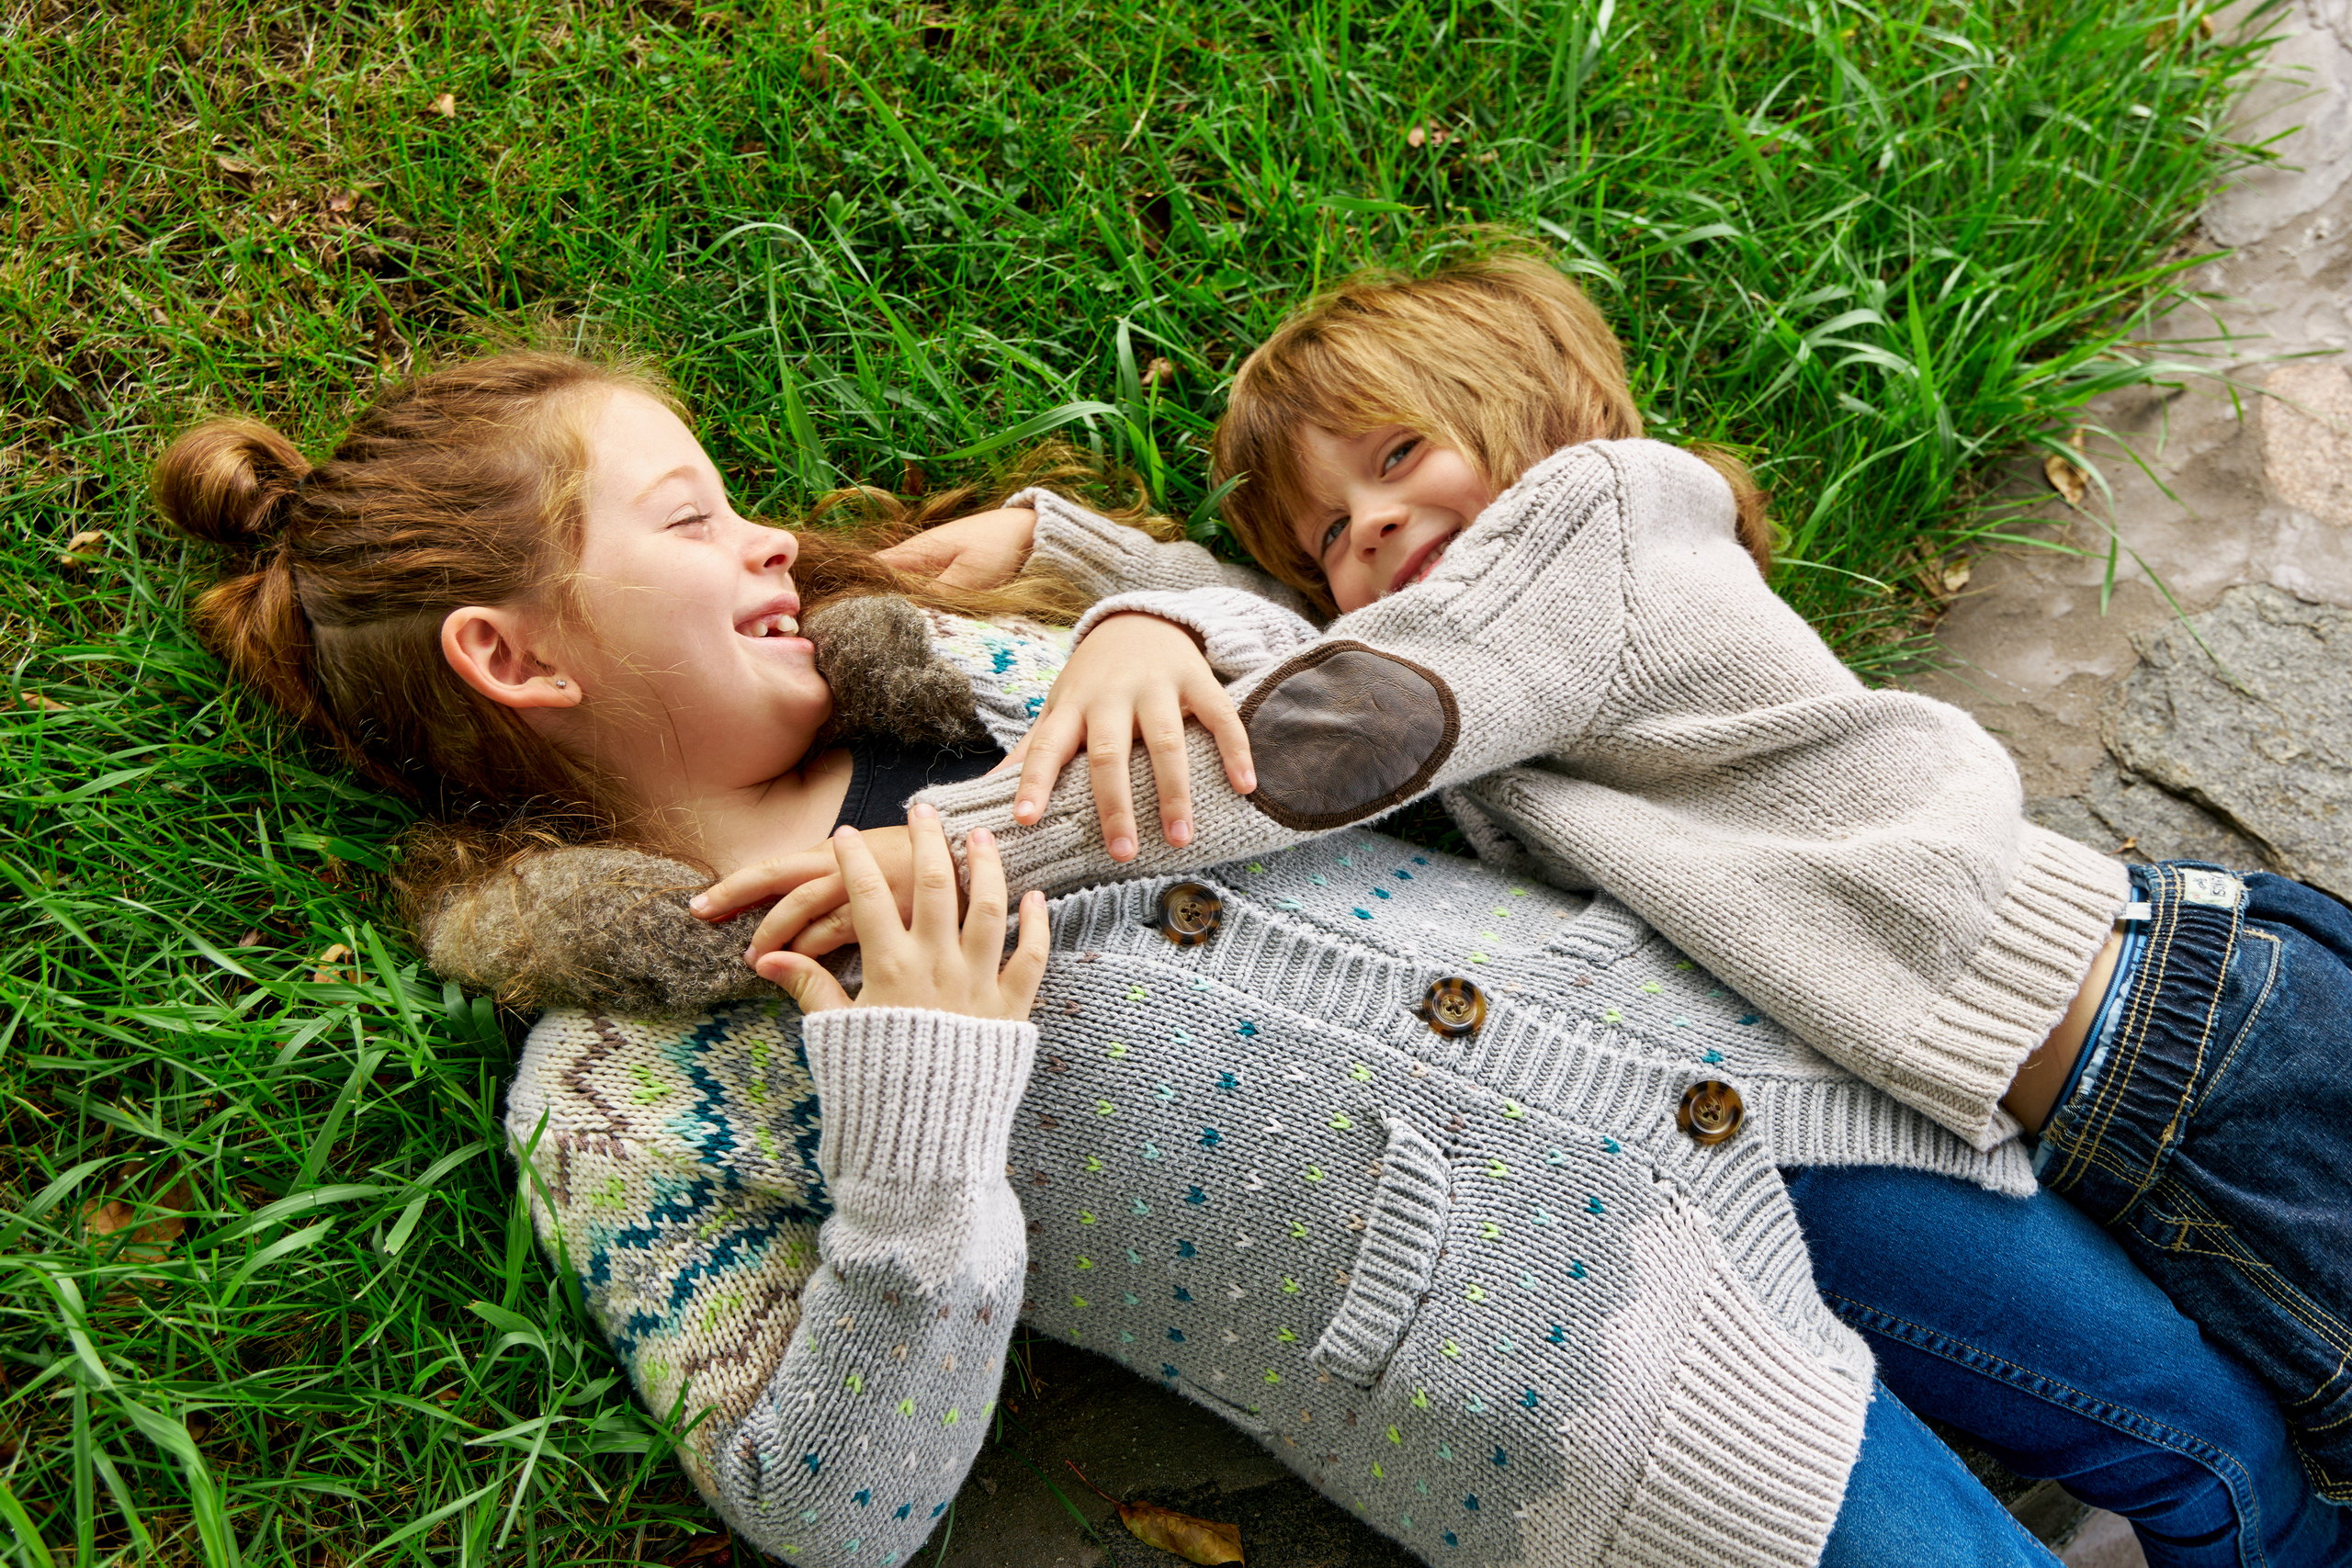 Brother and Sister Playfully Snuggle in Grass During a Family Portrait Session